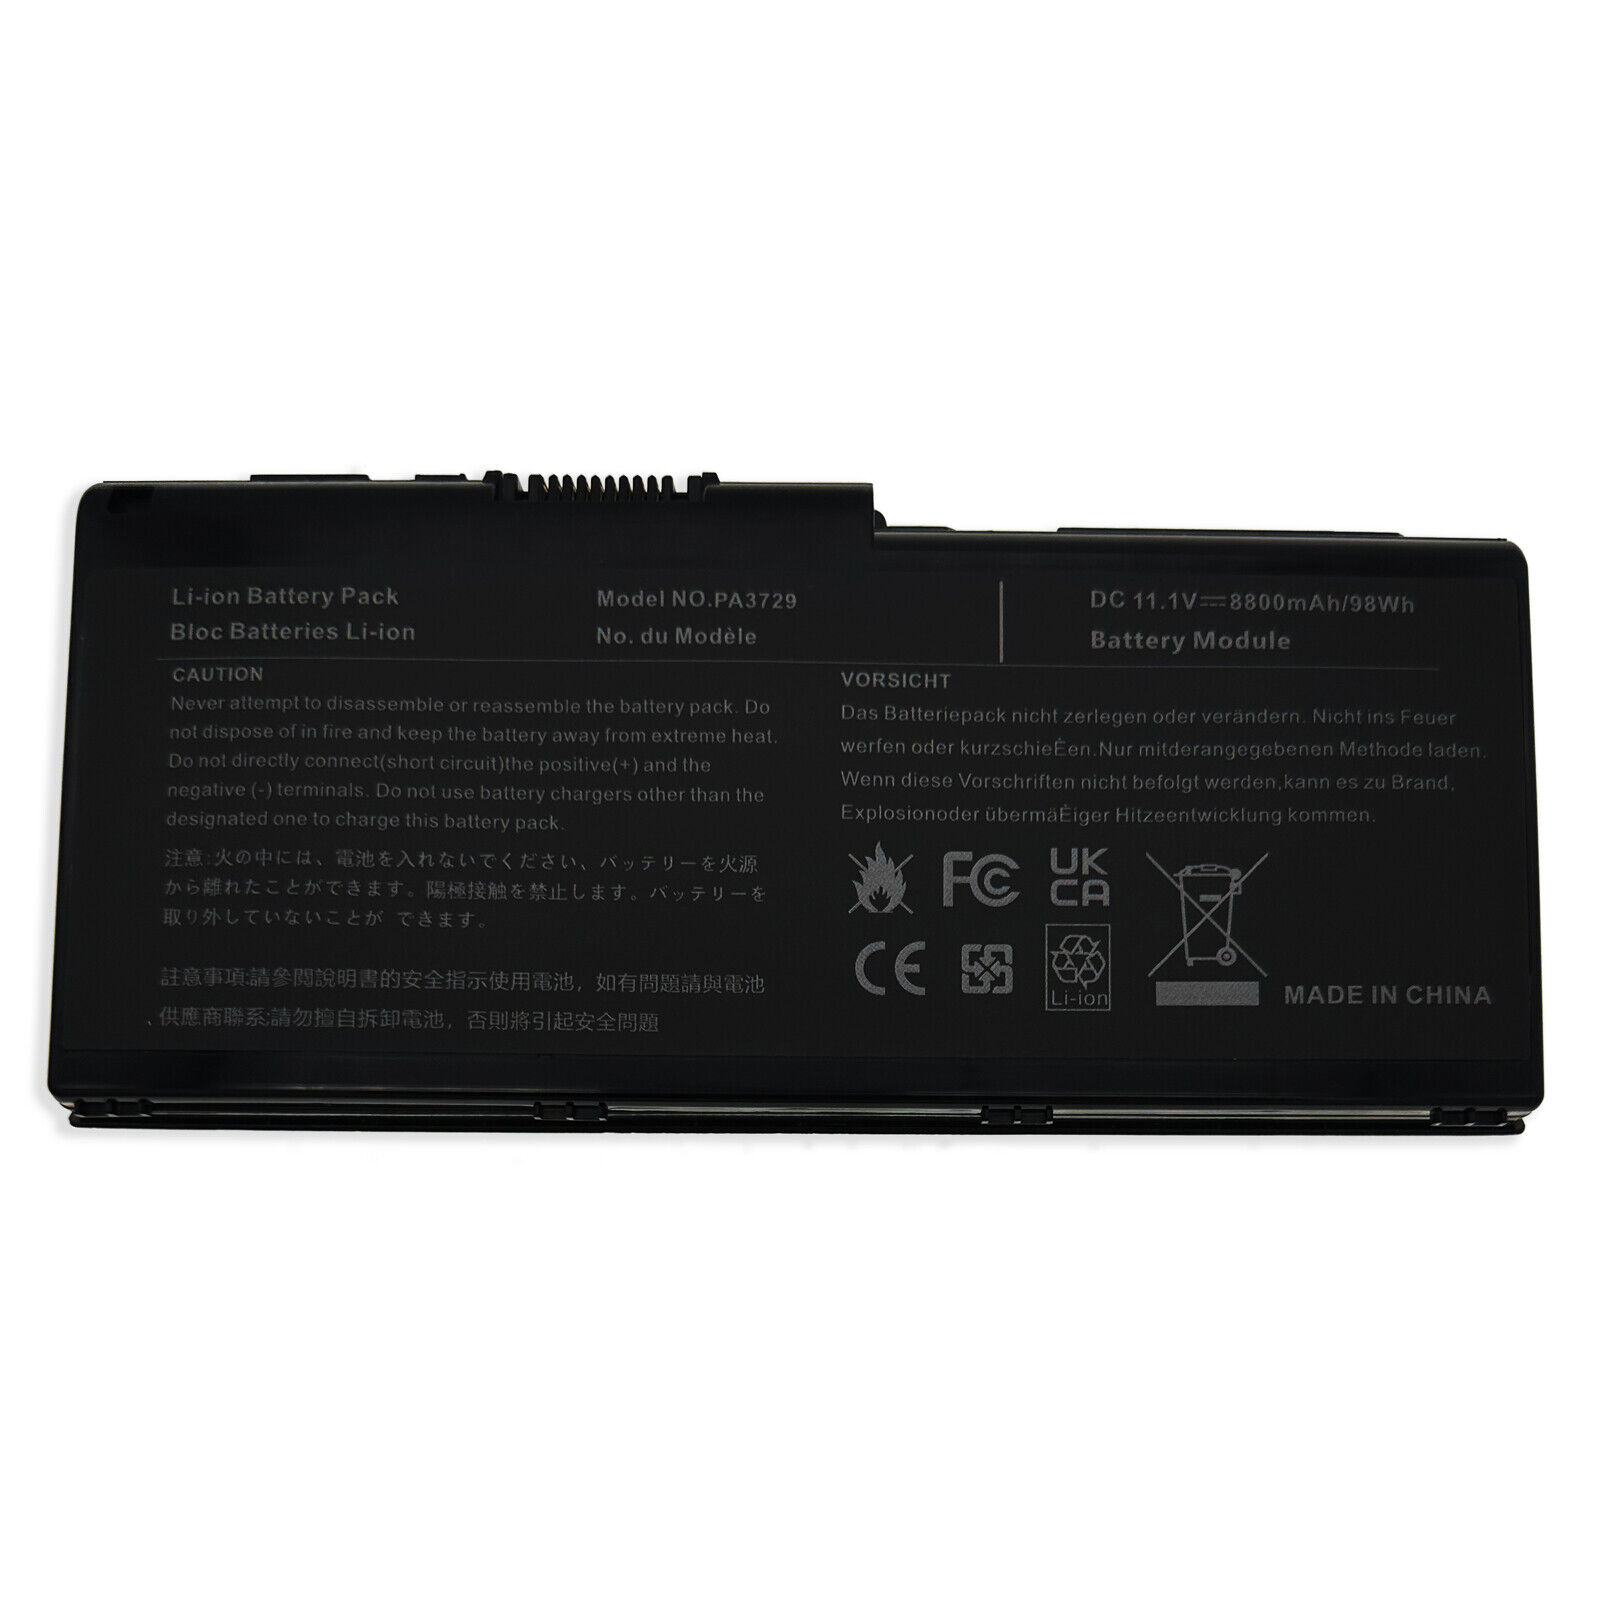 12 Cell 8800mAh New Battery For Toshiba Satellite P505-S8940, P505-S8945 Laptop